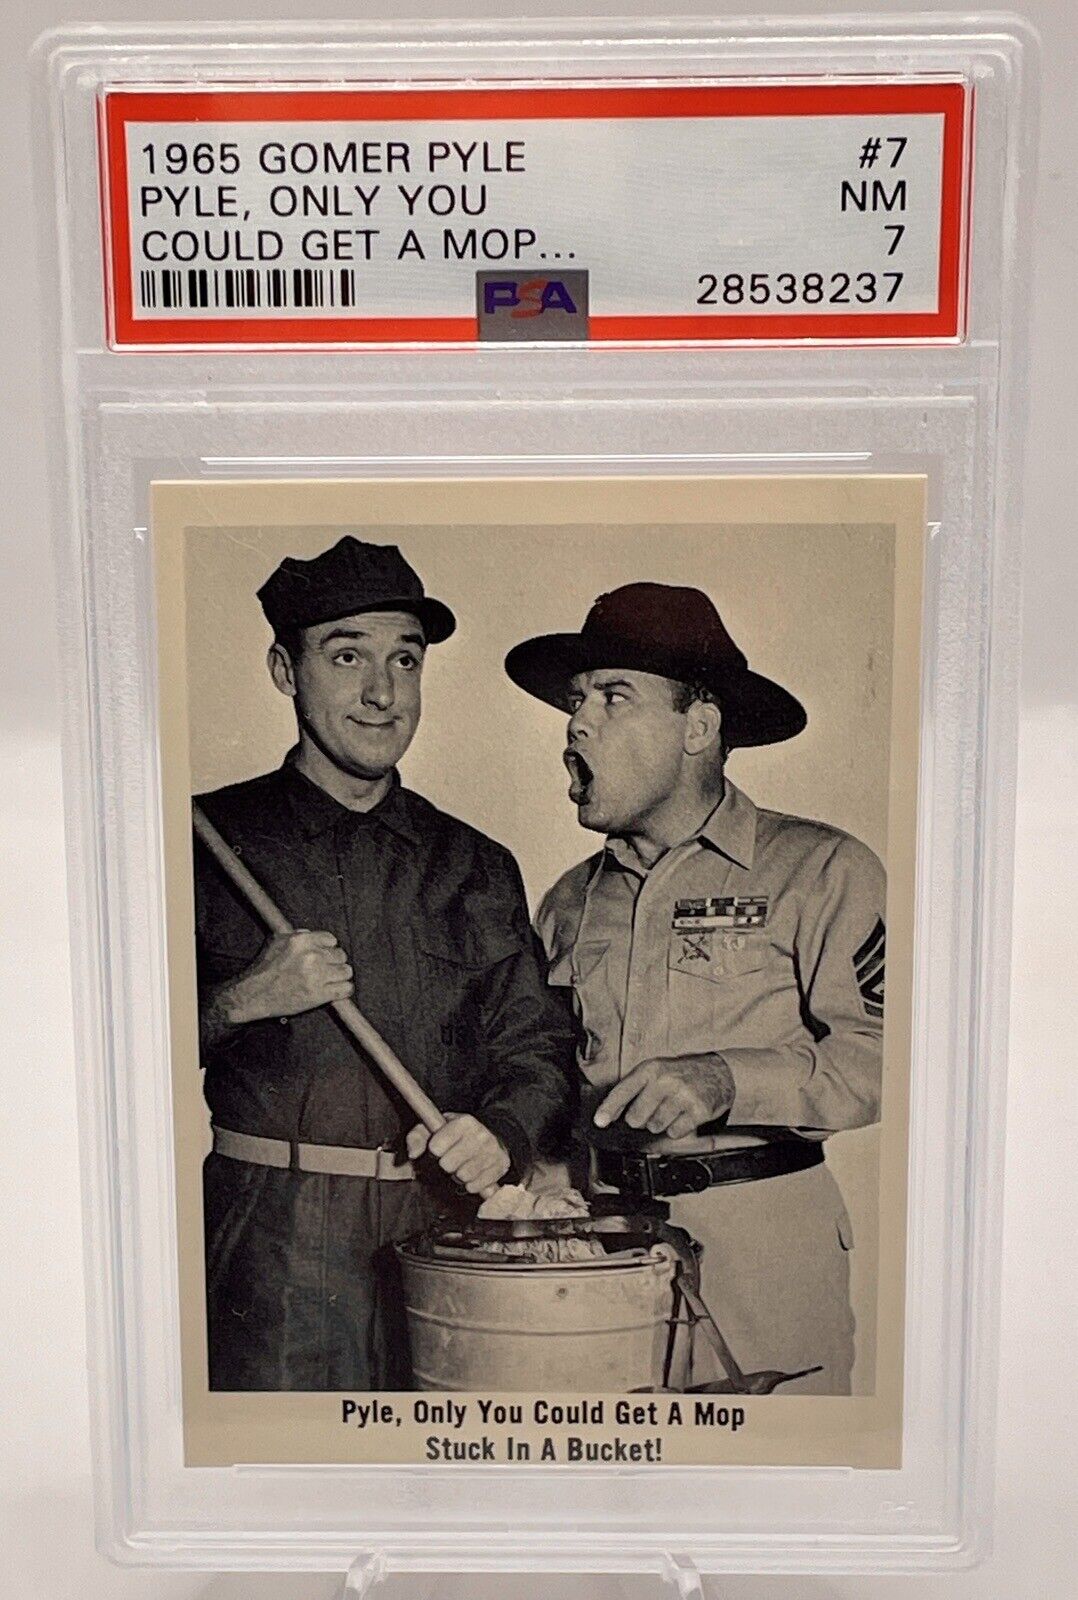 PSA Graded Gomer Pyle #7 NM 7 Pyle, Only You Could Get A Mop…